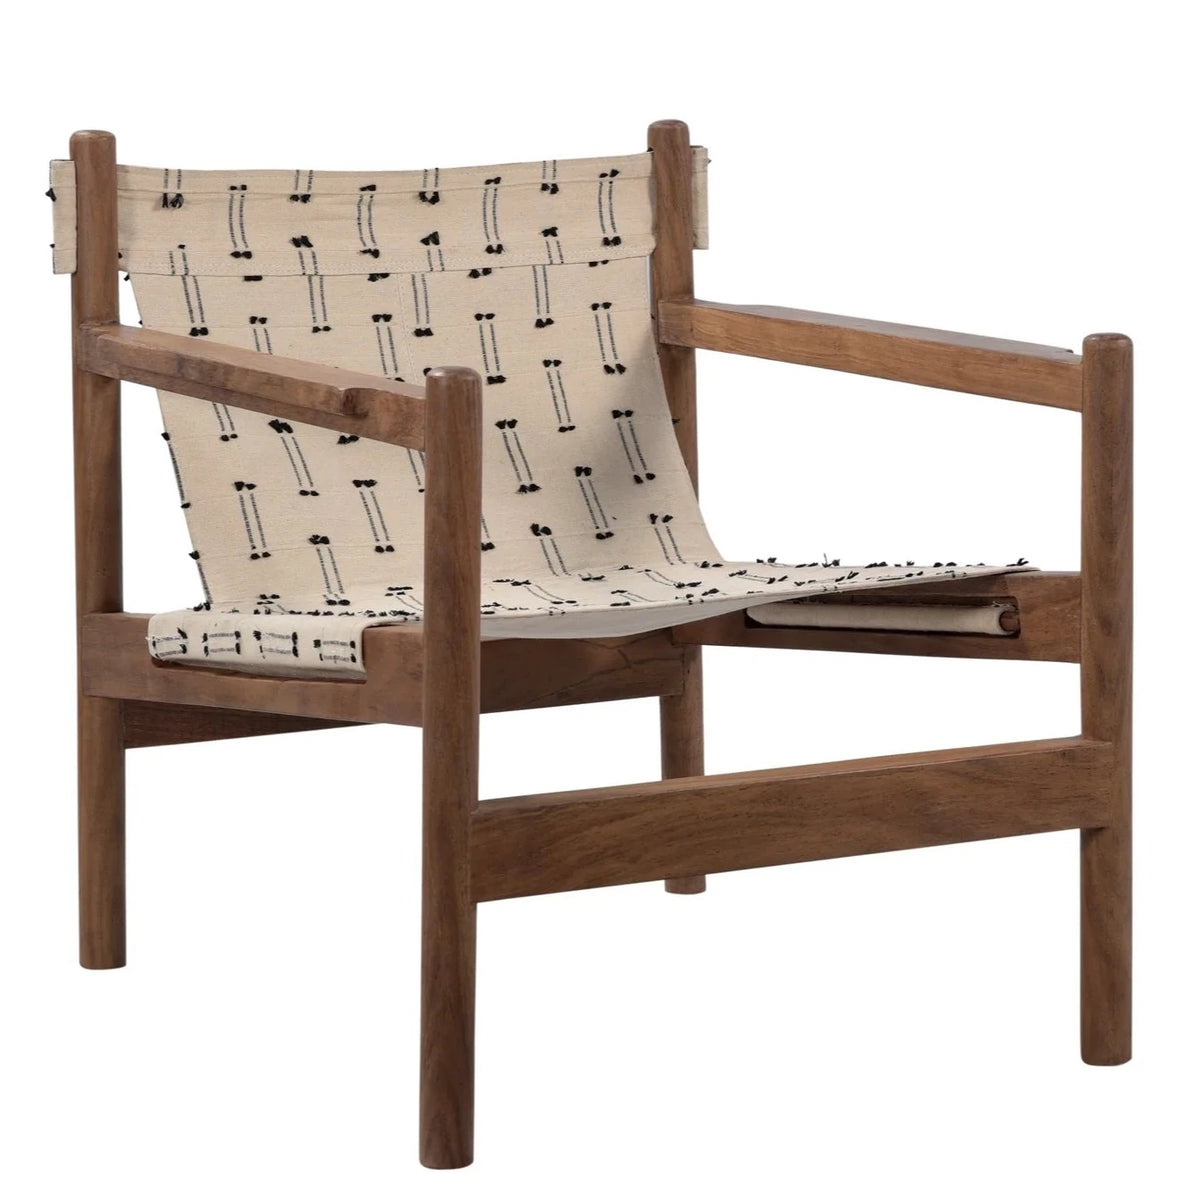 Nathanael Embroidered Cotton Sling Chair - Holistic Habitat 